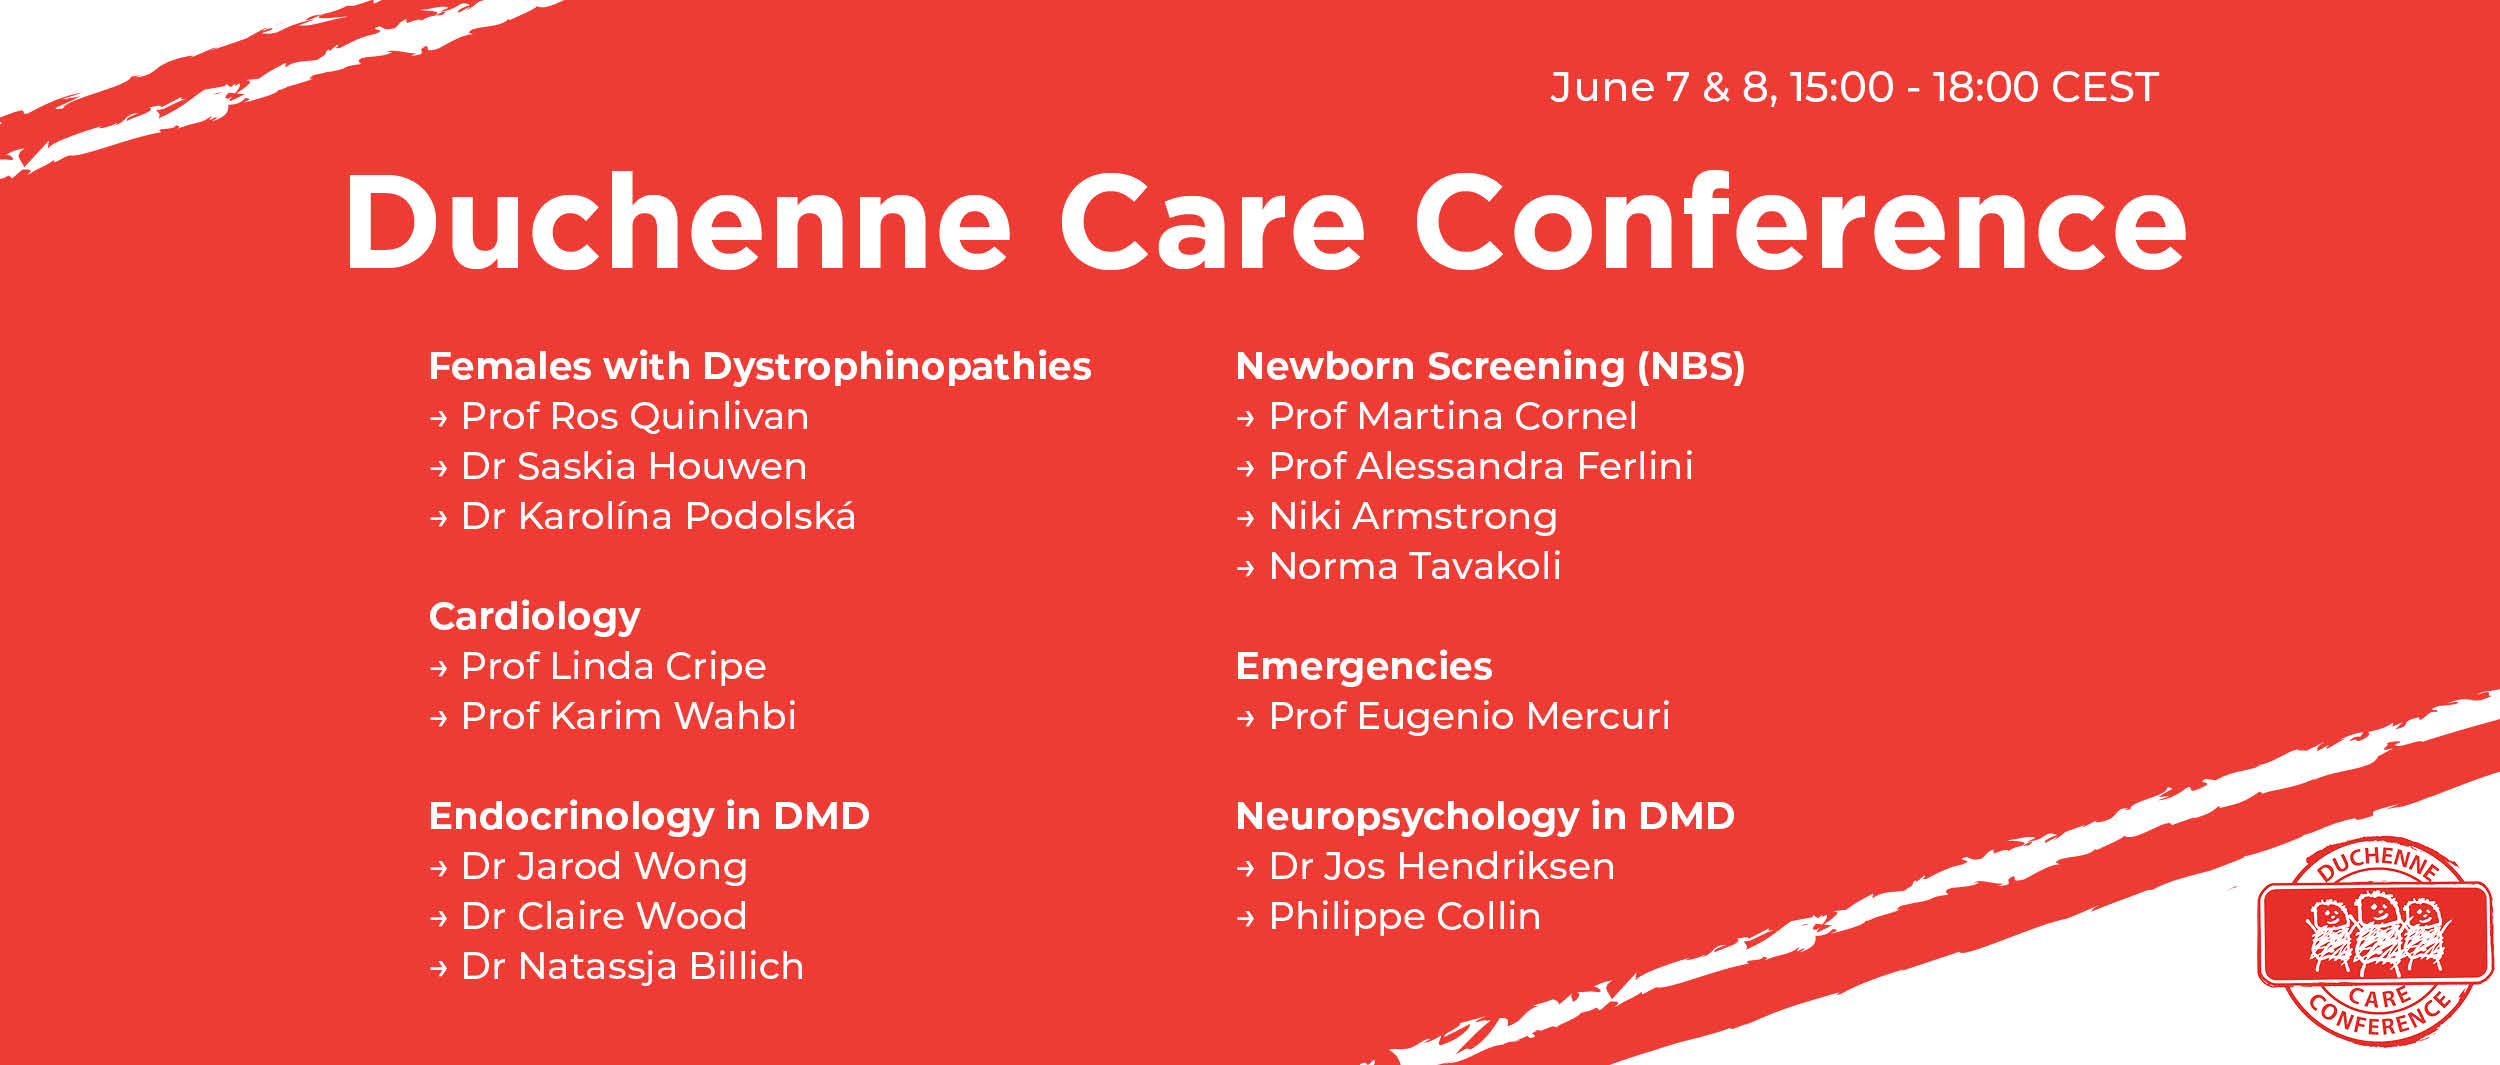 Agenda & Speakers for Duchenne Care Conference 2023